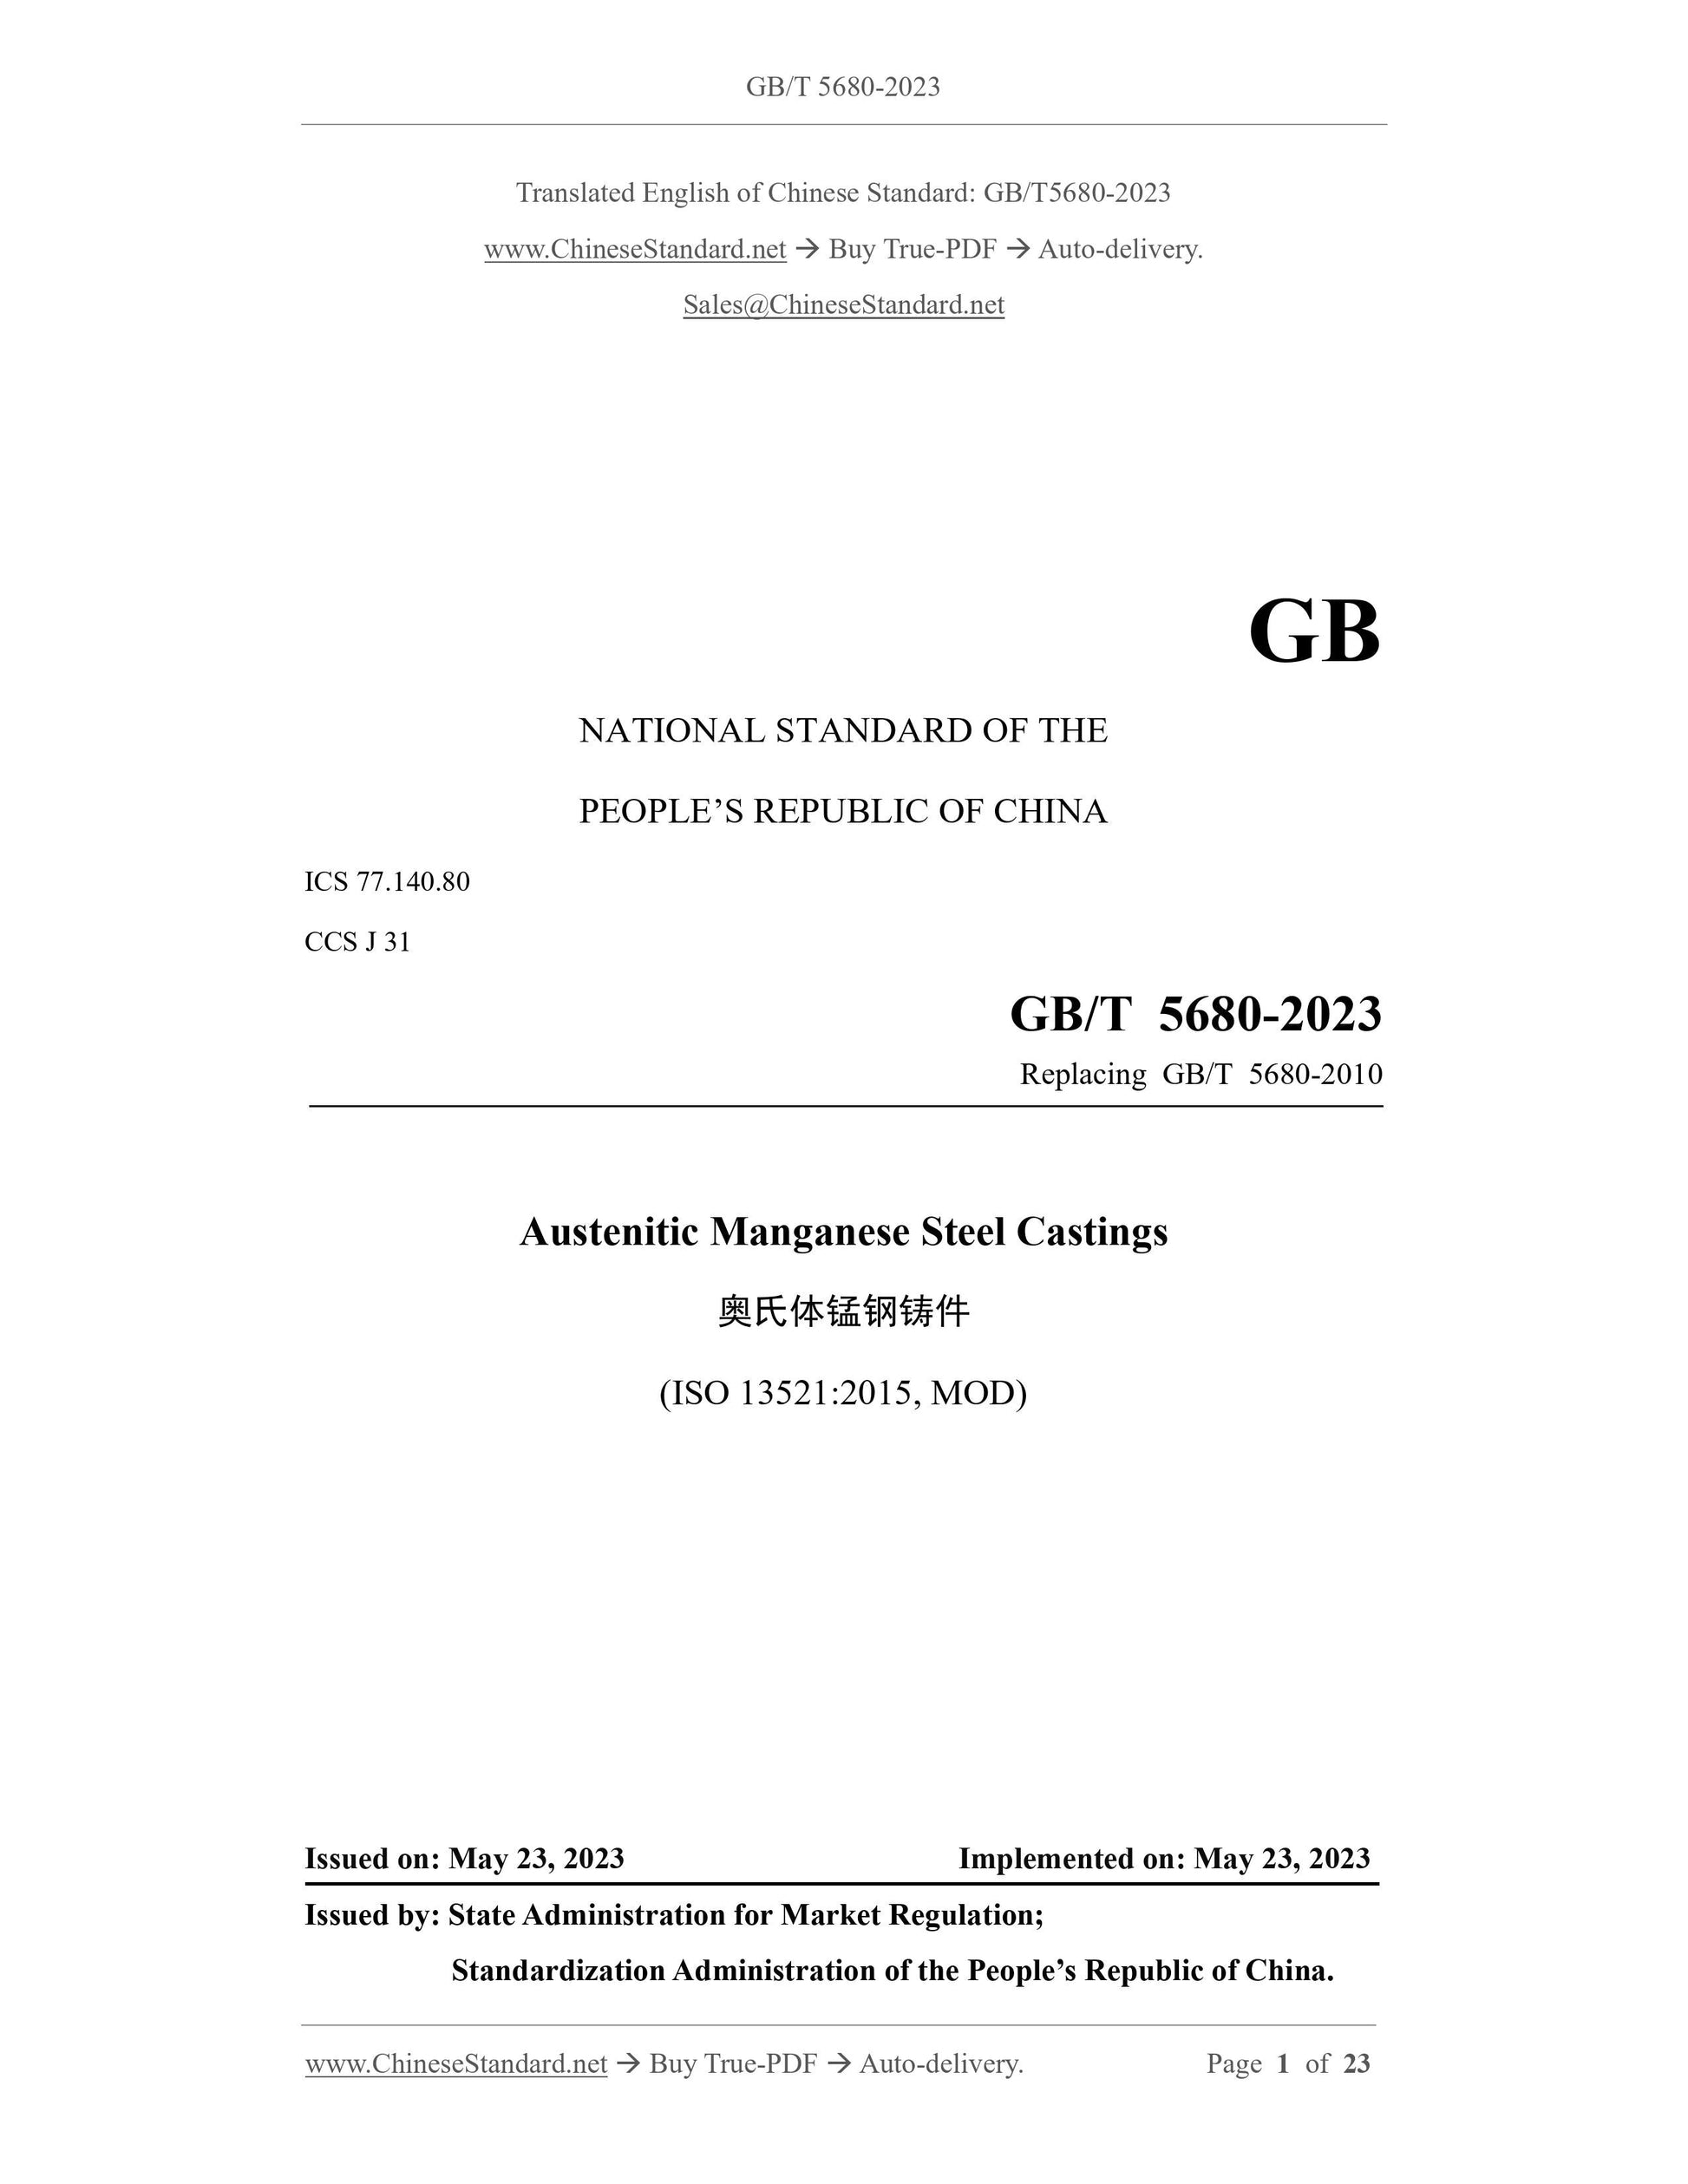 GB/T 5680-2023 Page 1